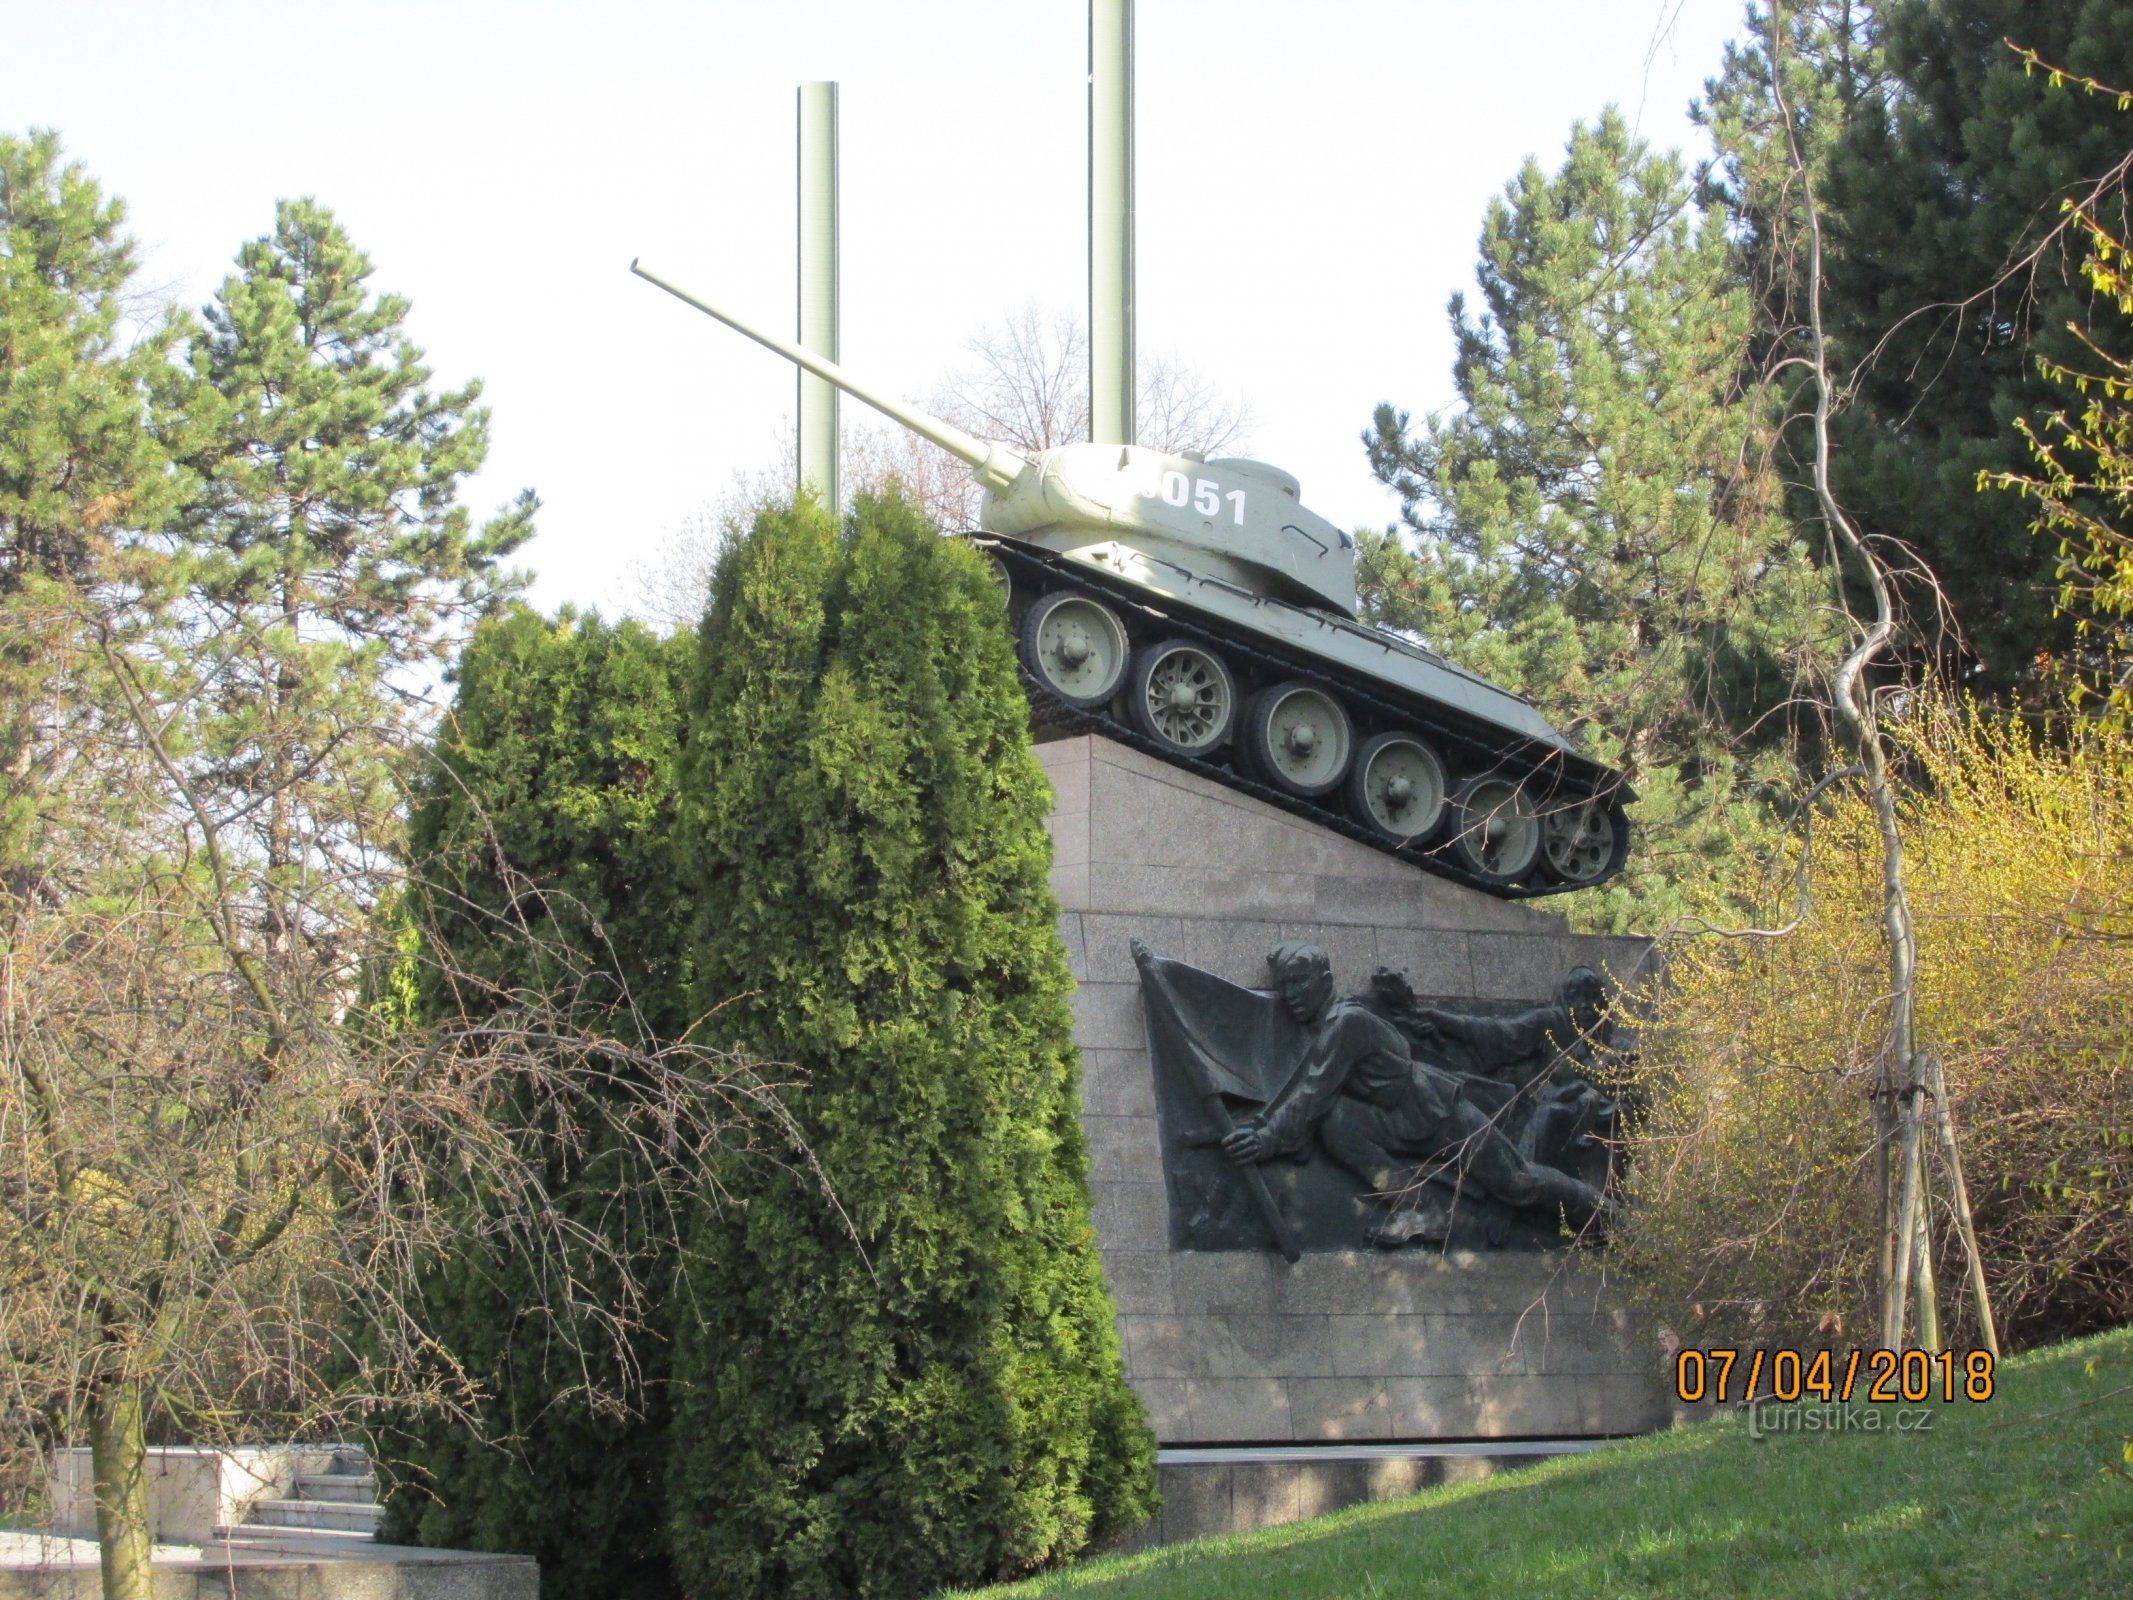 The tank that liberated Ostrava